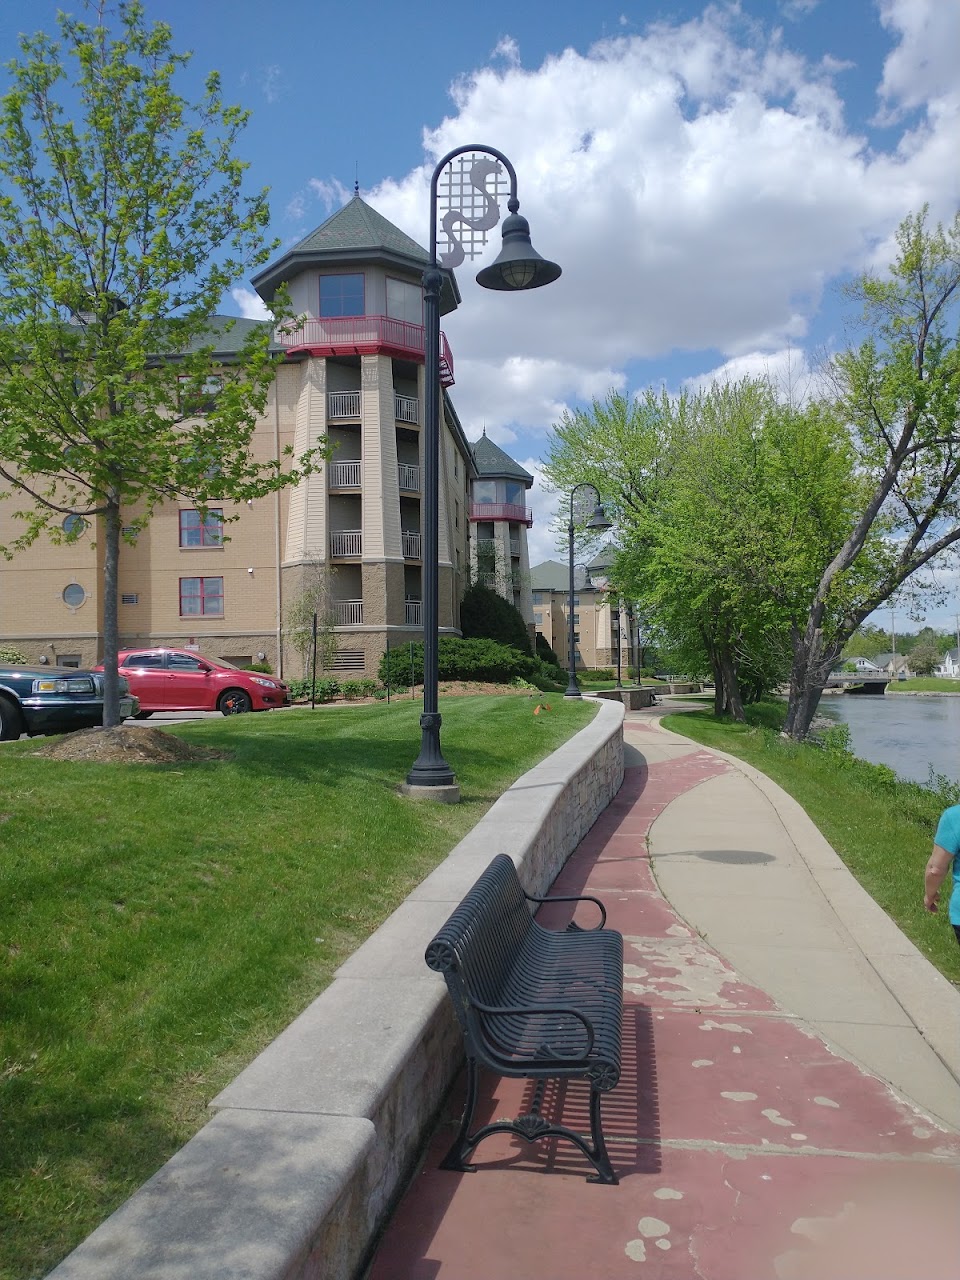 Photo of THE BOARDWALK. Affordable housing located at 232 BRIDGE ST BURLINGTON, WI 53105